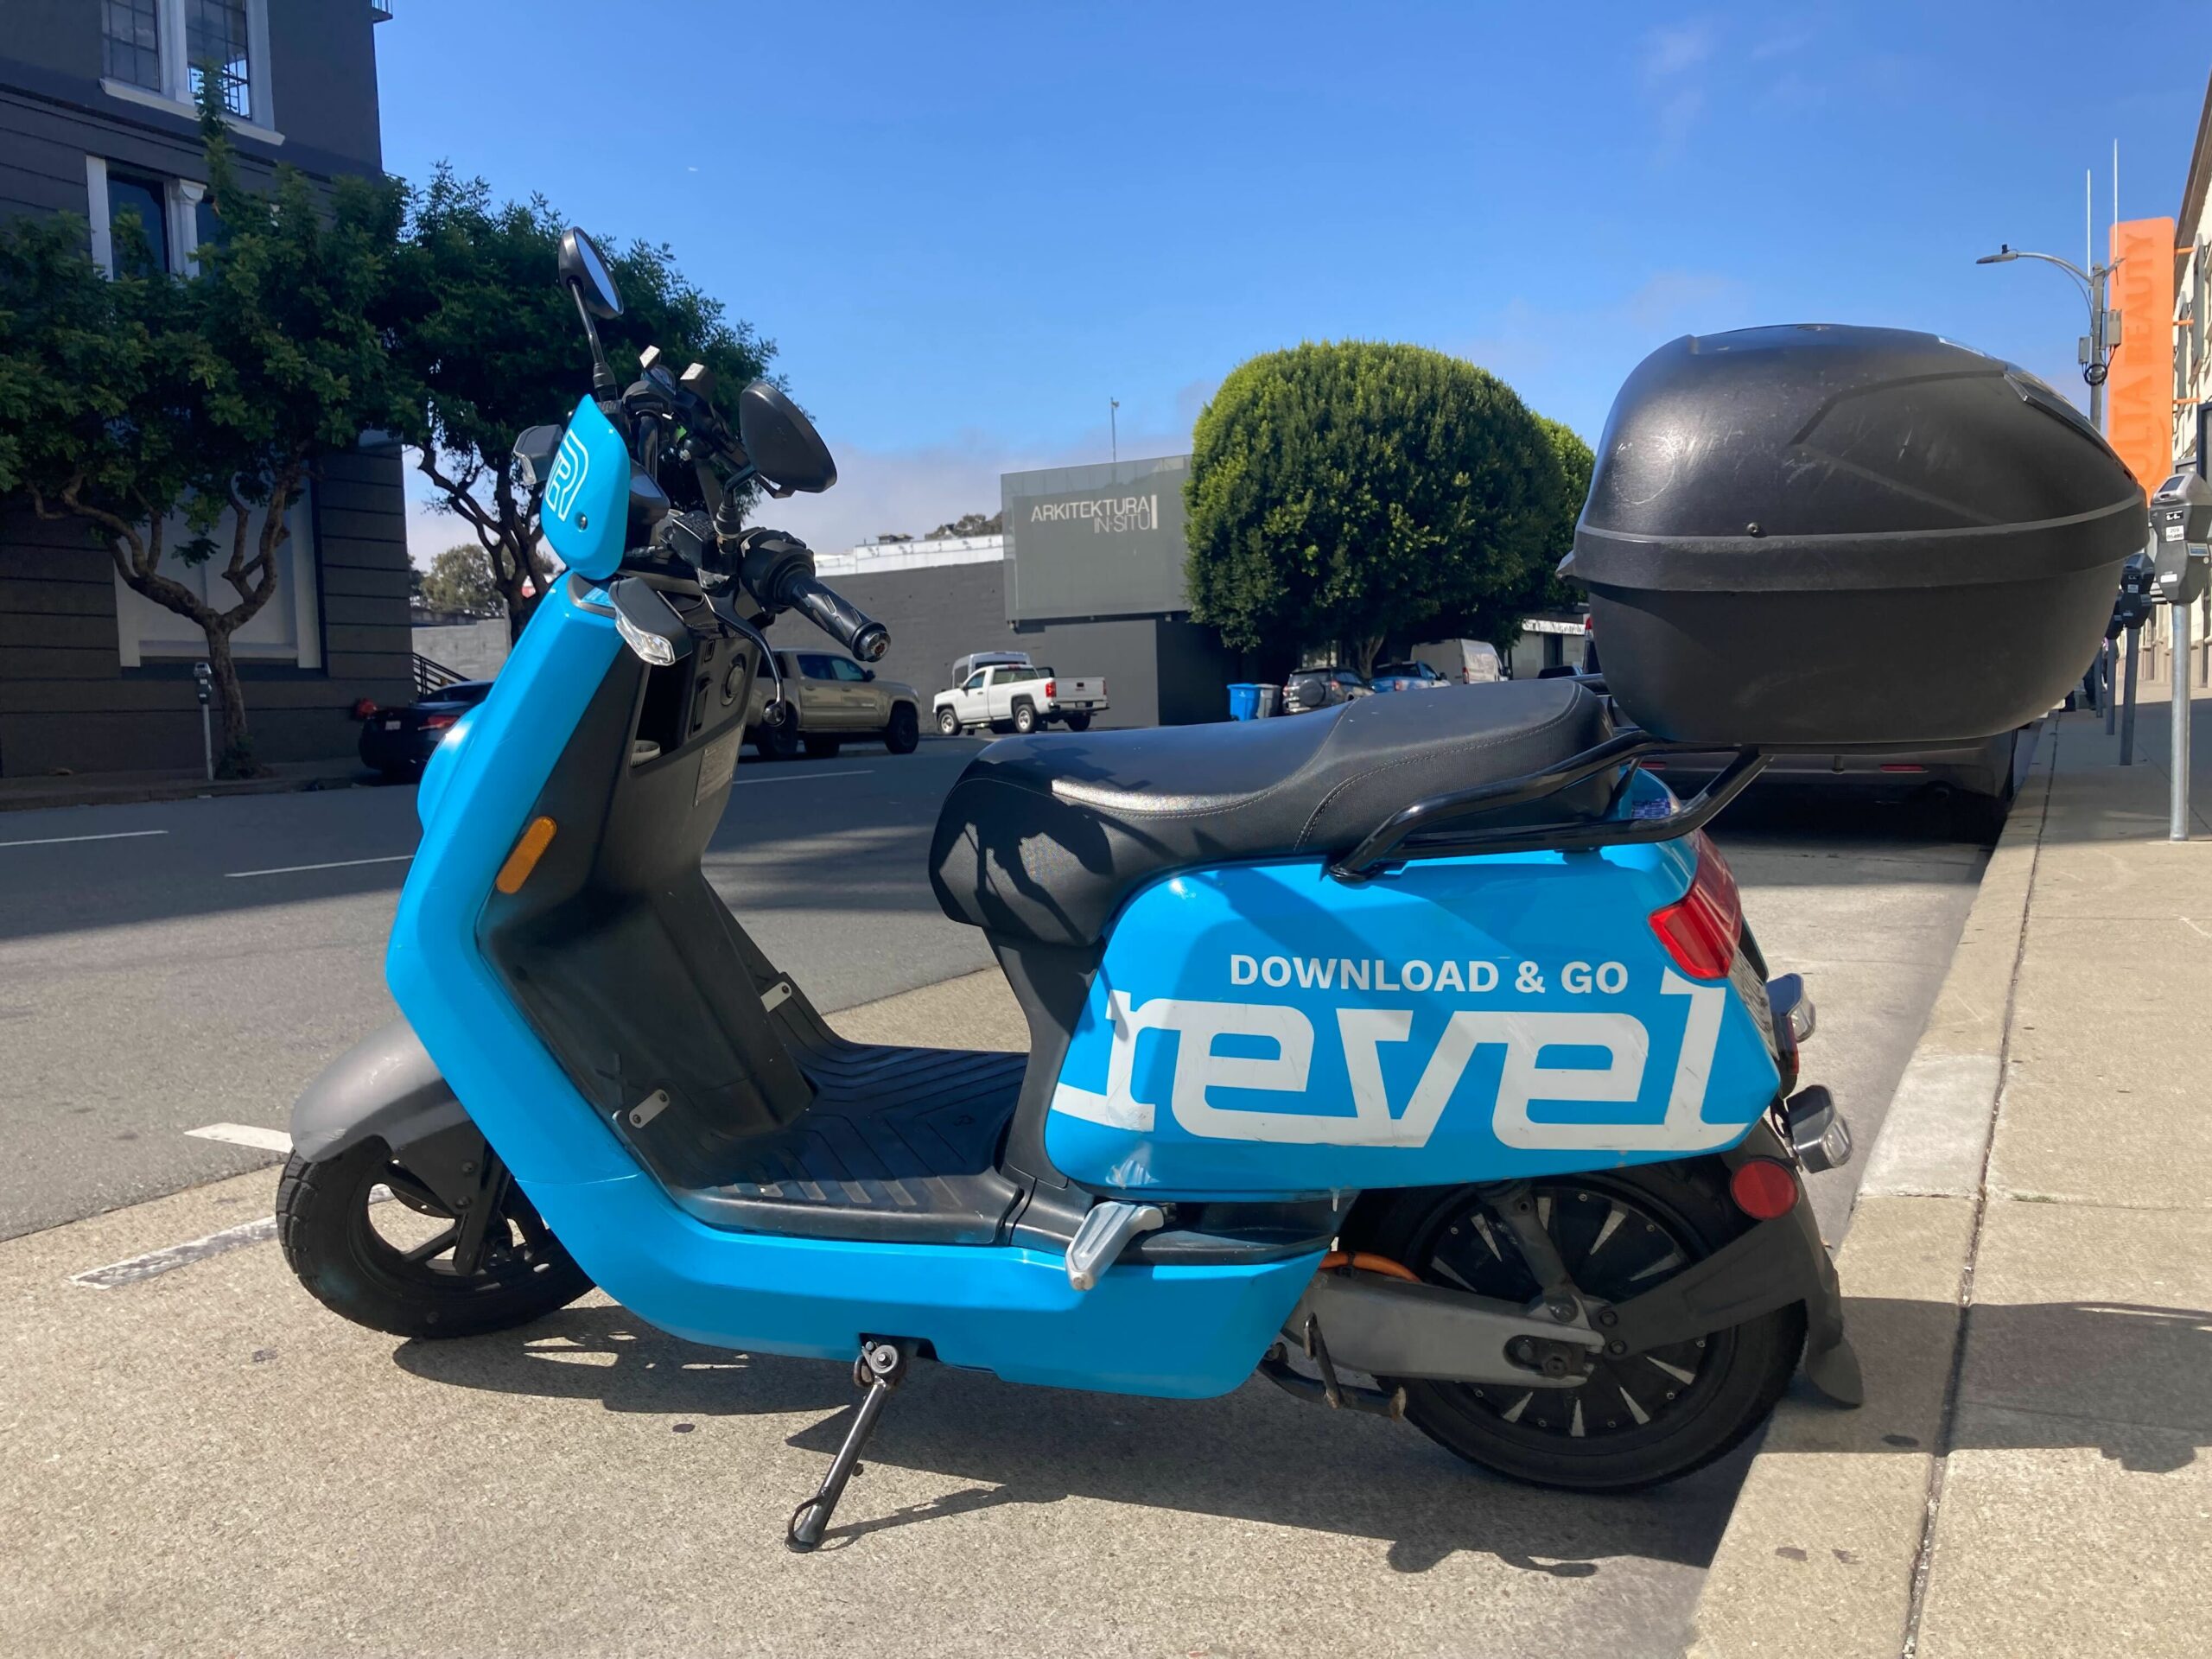 A blue moped is parked with its back wheel against a curb in San Francisco's SoMa neighborhood.